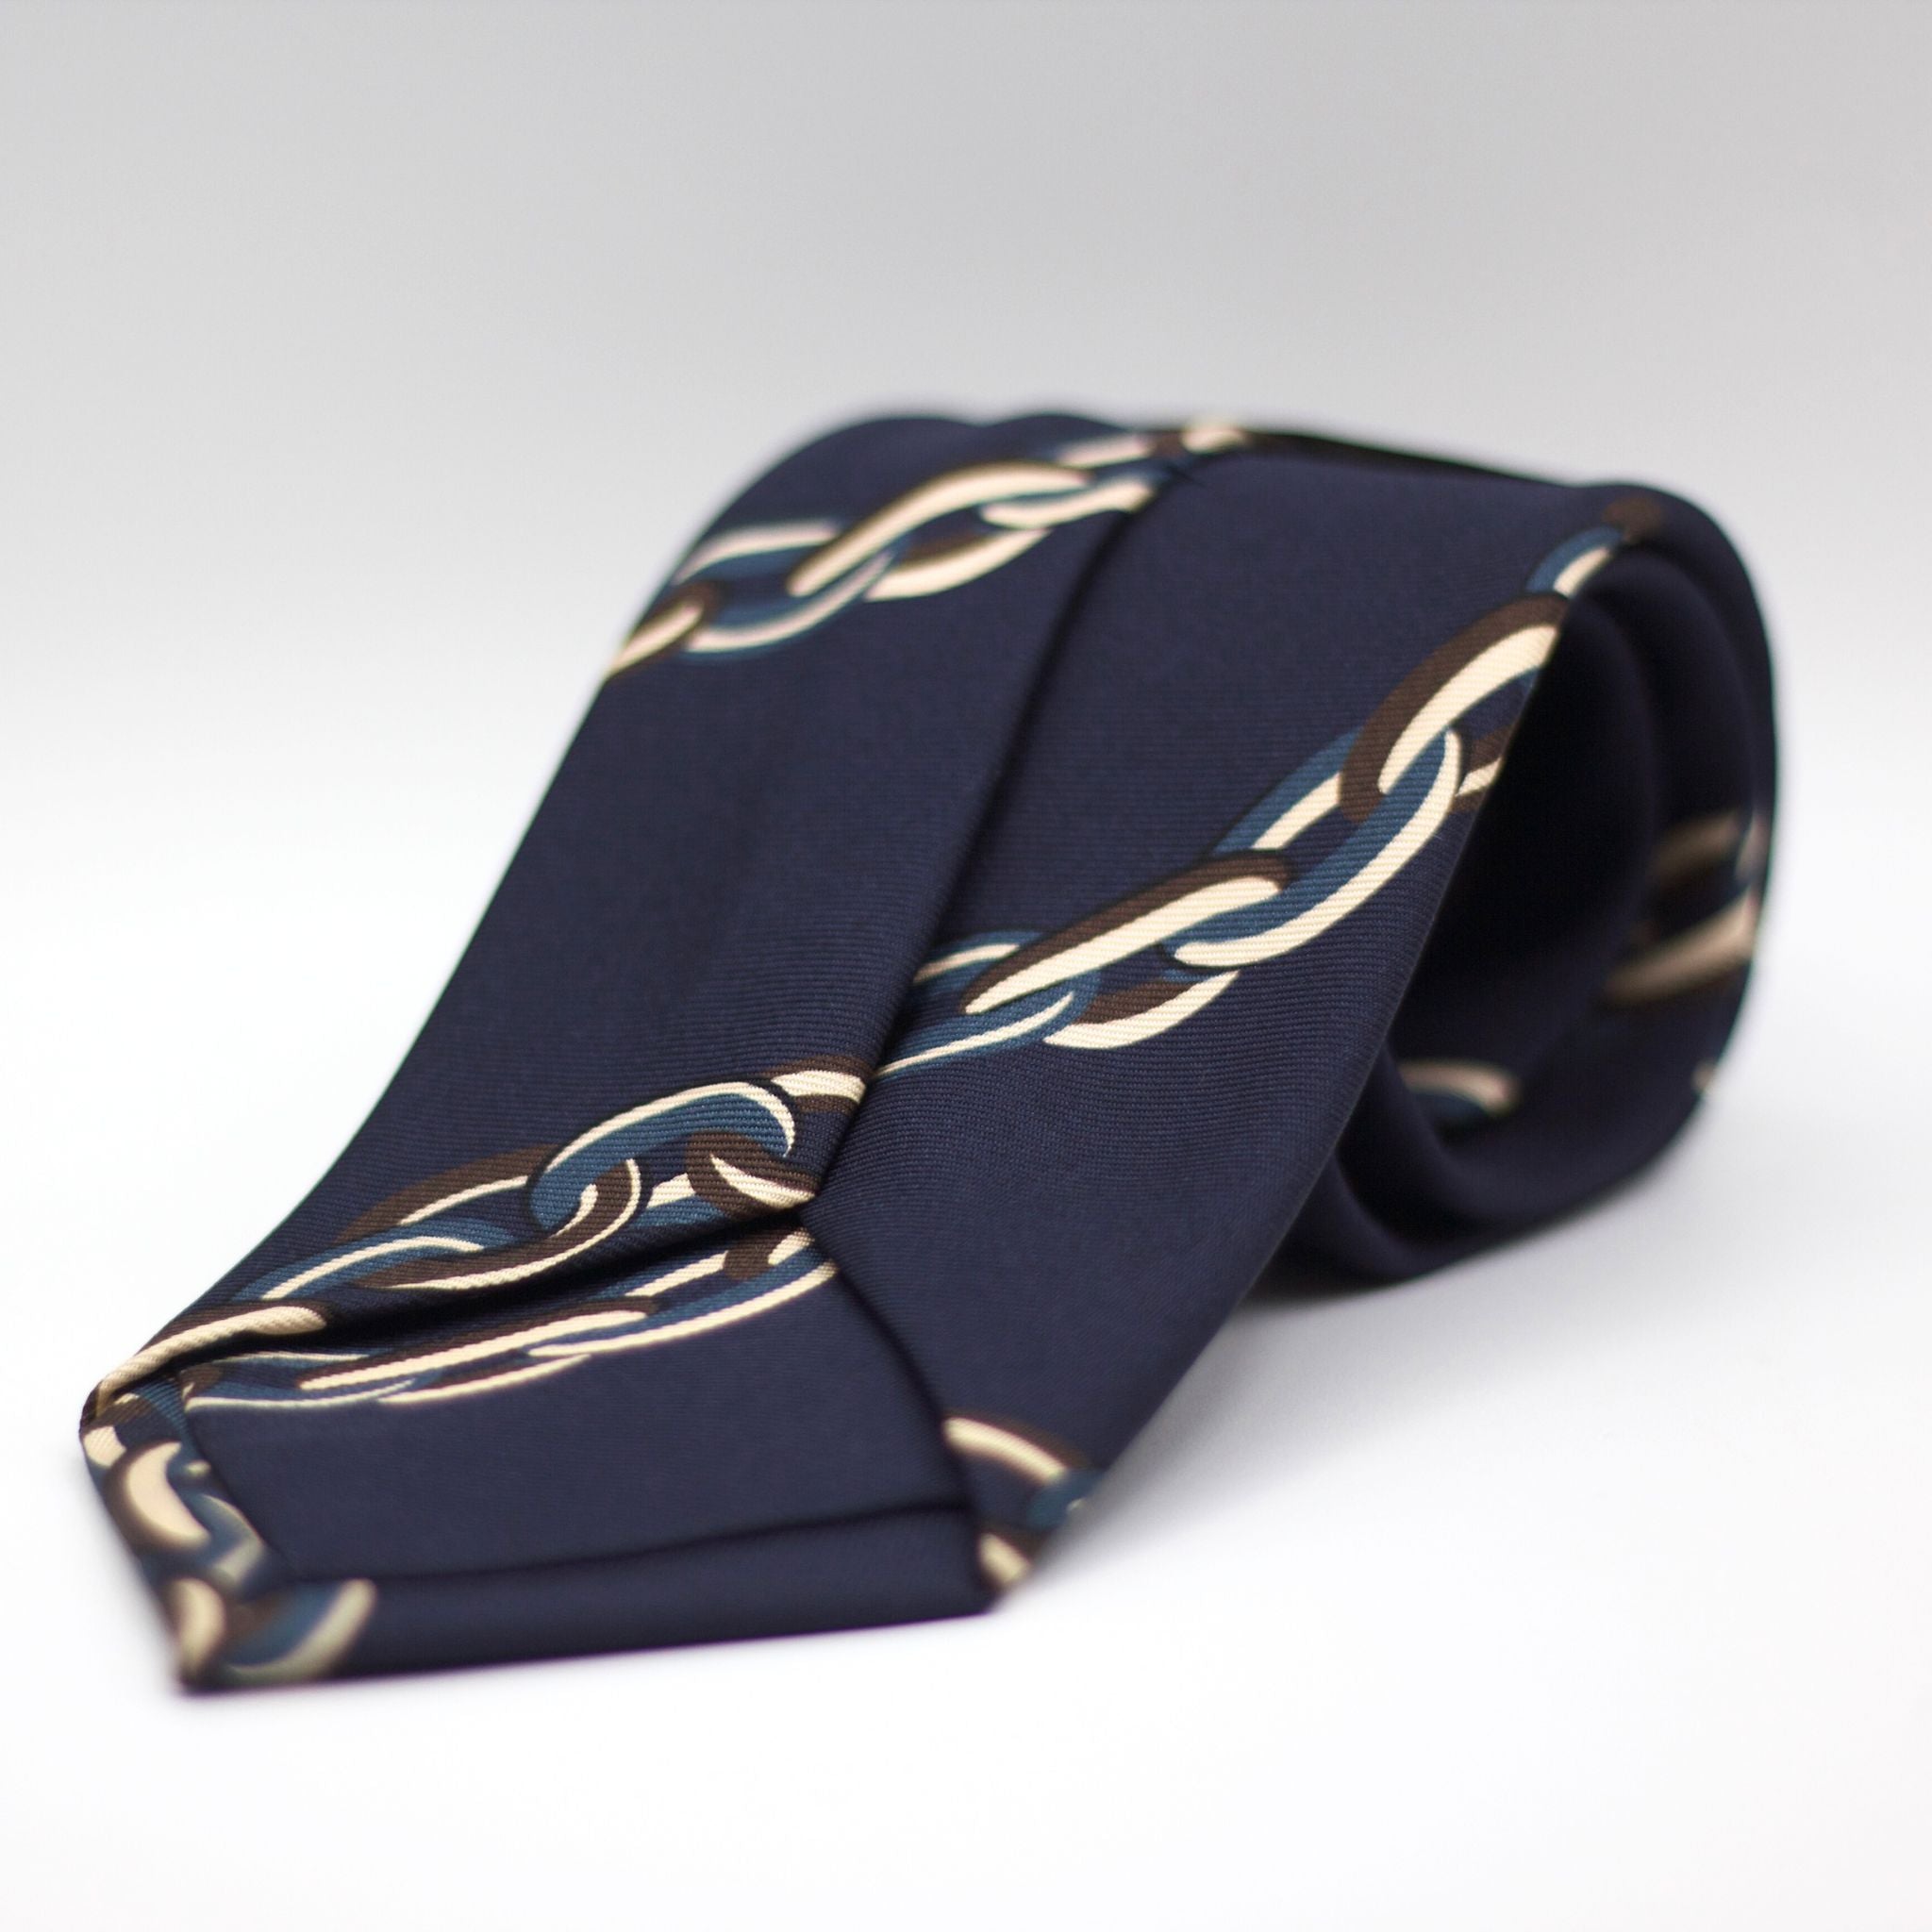 Holliday & Brown - Woven Jacquard Silk - Blue, Off White, Brown and Indigo Tie